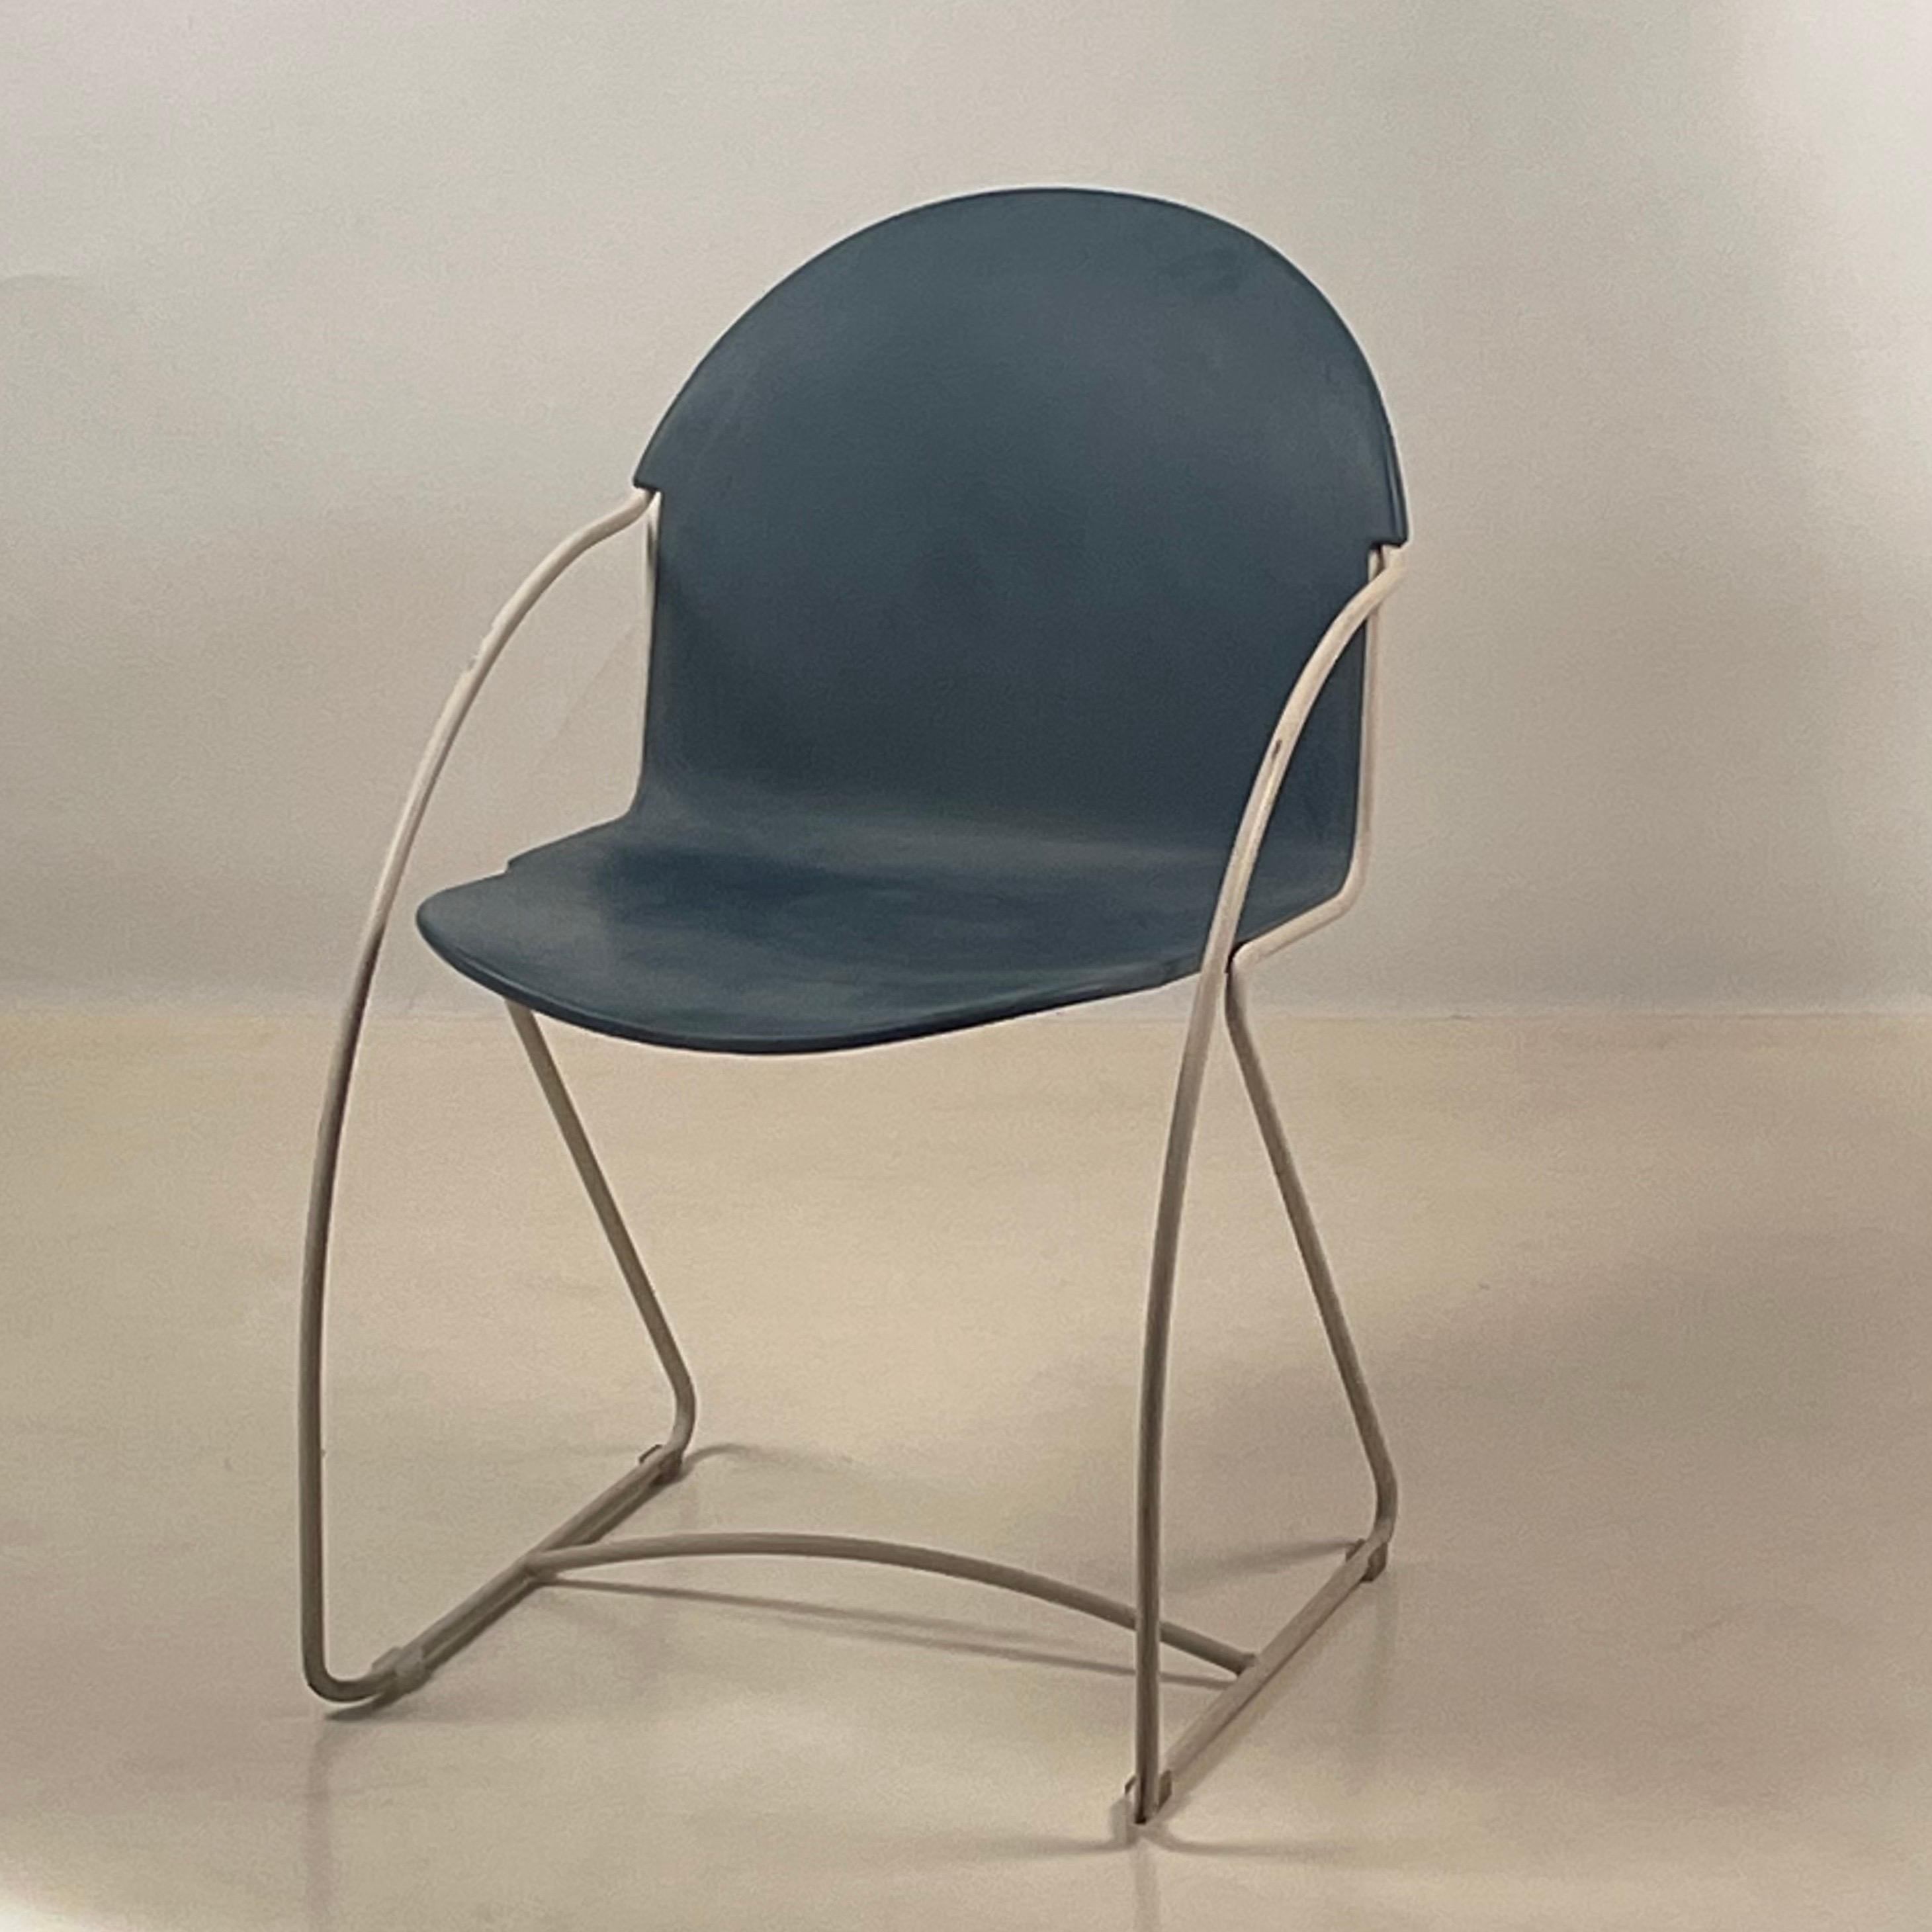 Set of 4 Enameled Indoor / Outdoor Post-Modern Stacking Shell Chairs In Good Condition For Sale In Los Angeles, CA